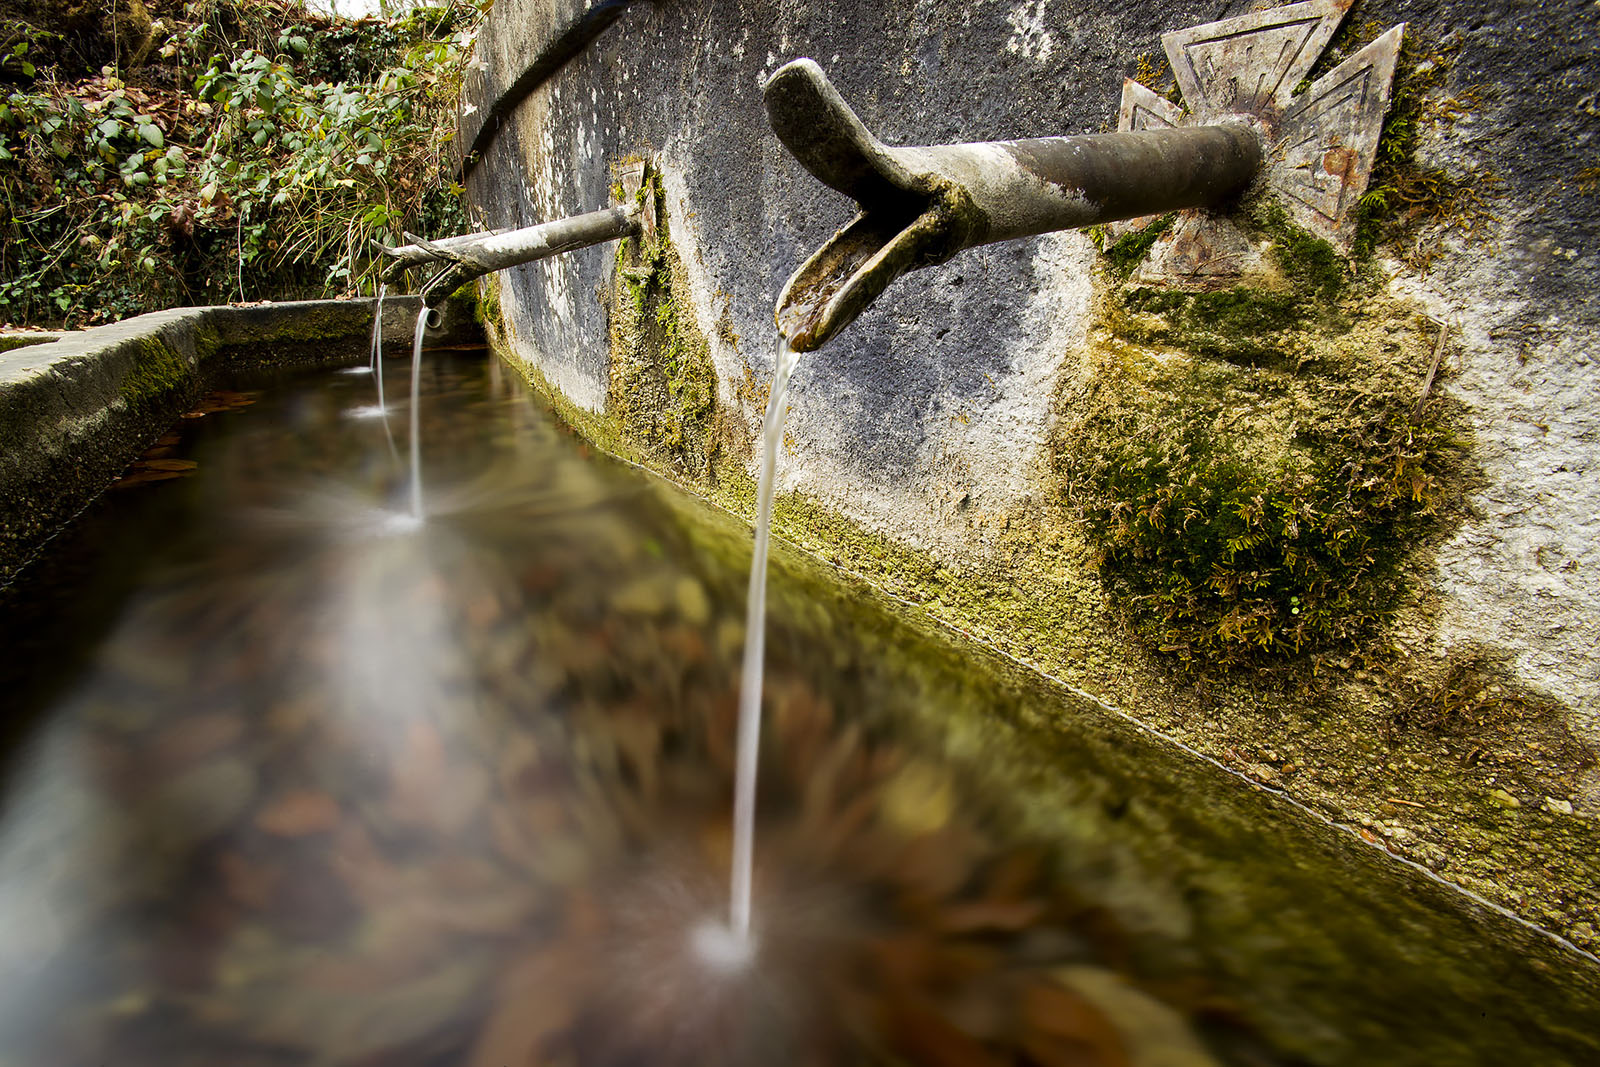 Modern photograph of a trough of water being fed by ornamented spouts. Moss covers the stone.